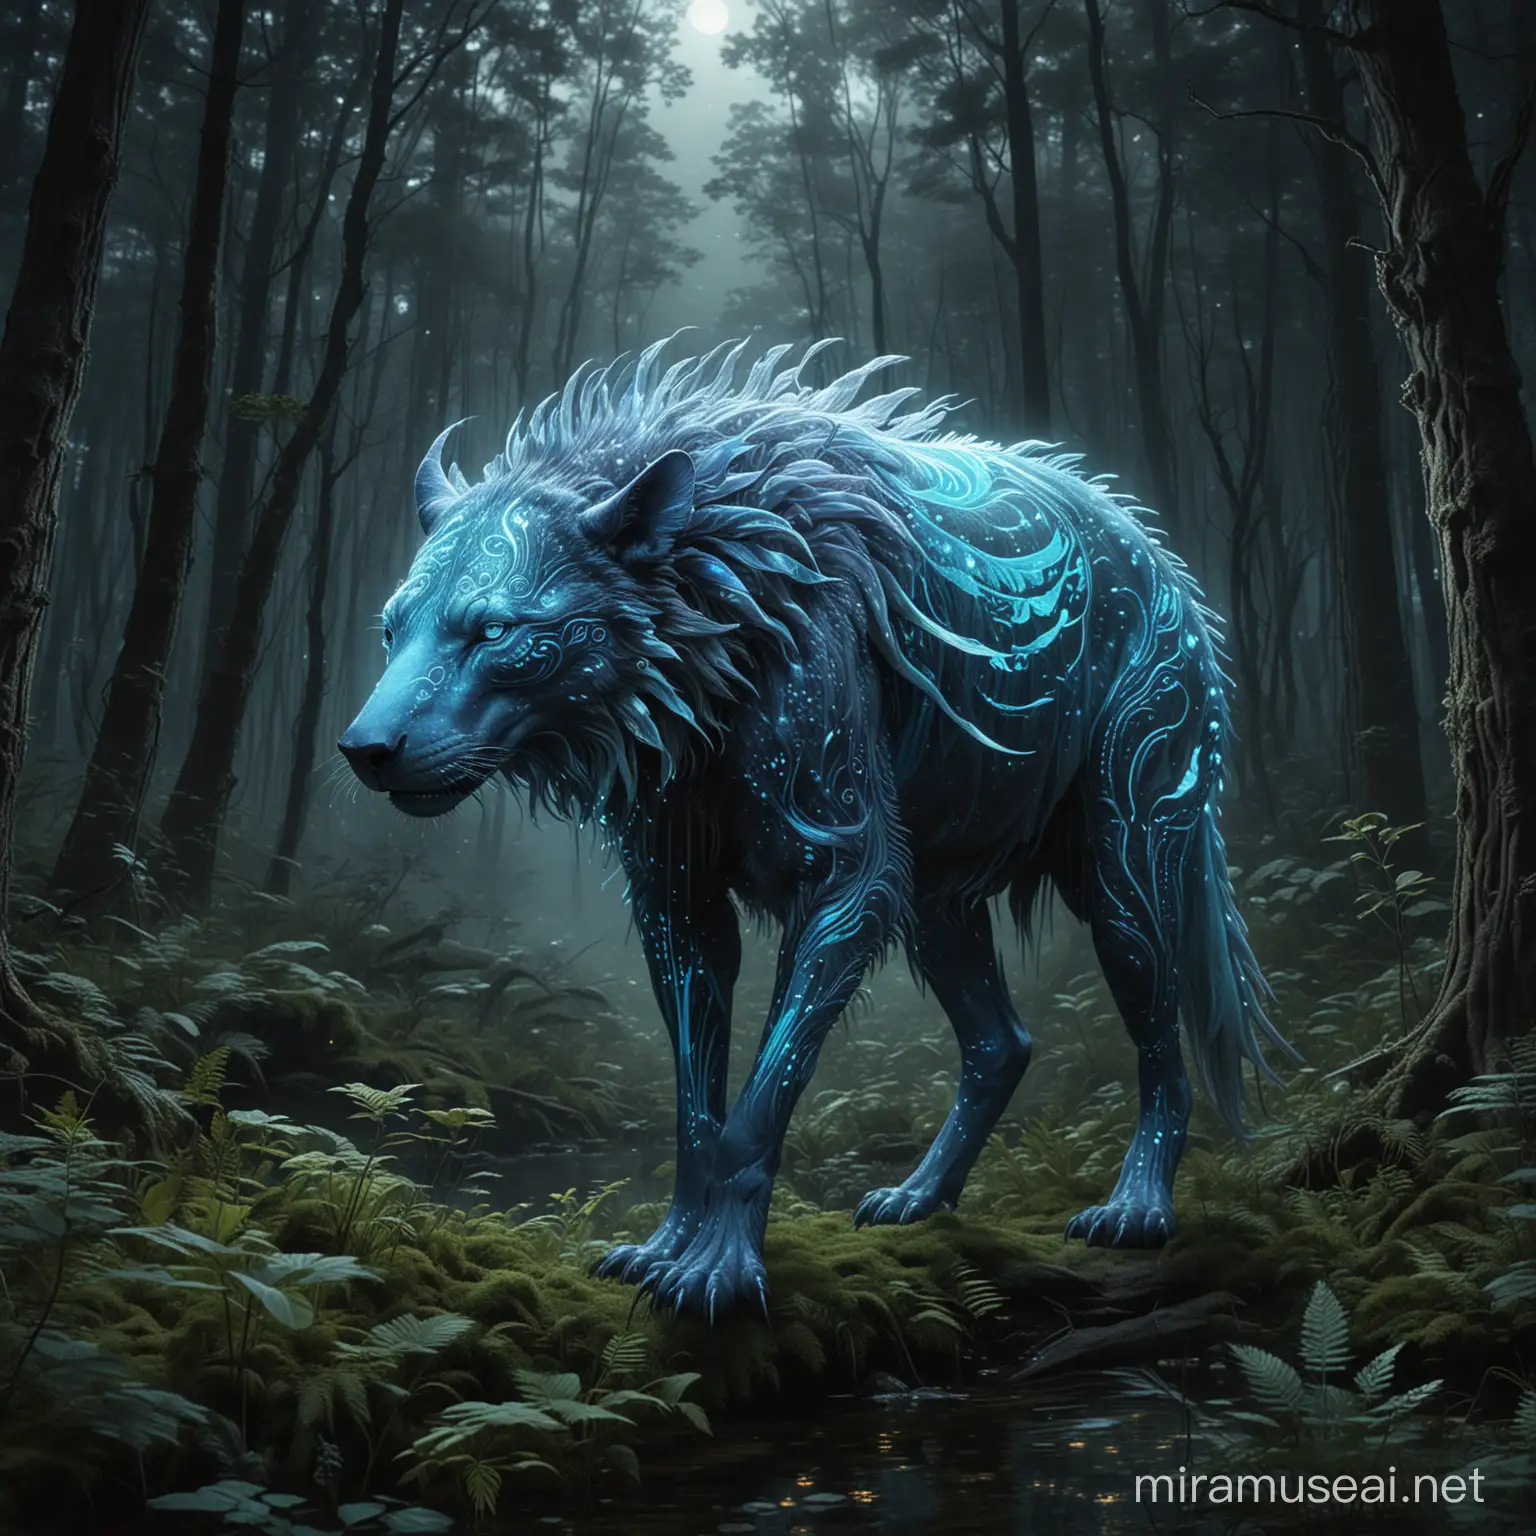 In a darkwave-driven bioluminescent parallel universe, a majestic animal softly glows with accents of an ethereal light, its form  is that of a real world animal. This concept art piece is a digital painting, showcasing the creature coexisting within a luminescent forest. The creature's iridescent accents shimmer, reflecting the otherworldly glow around it. The scene is rich in detail, with intricate patterns of  flora and fauna adding to the surreal atmosphere. The image is expertly crafted, creating a mesmerizing and immersive world for viewers to explore.